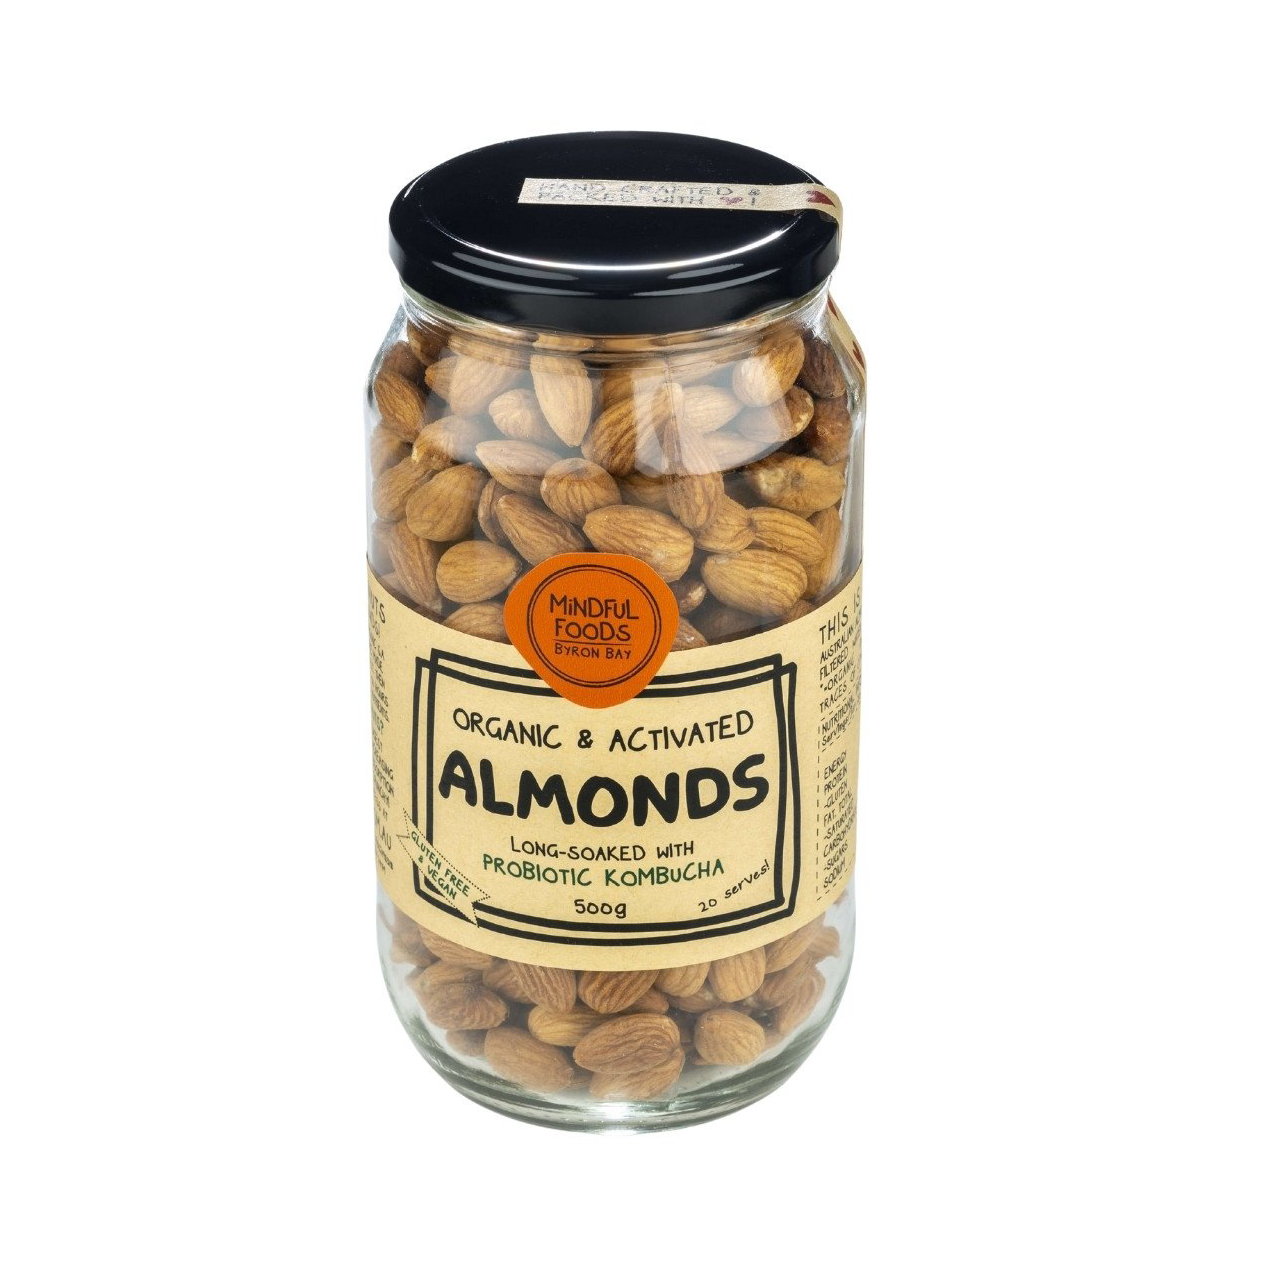 Mindful Foods Almonds 225g, 450g Or 1kg (Organic & Activated)